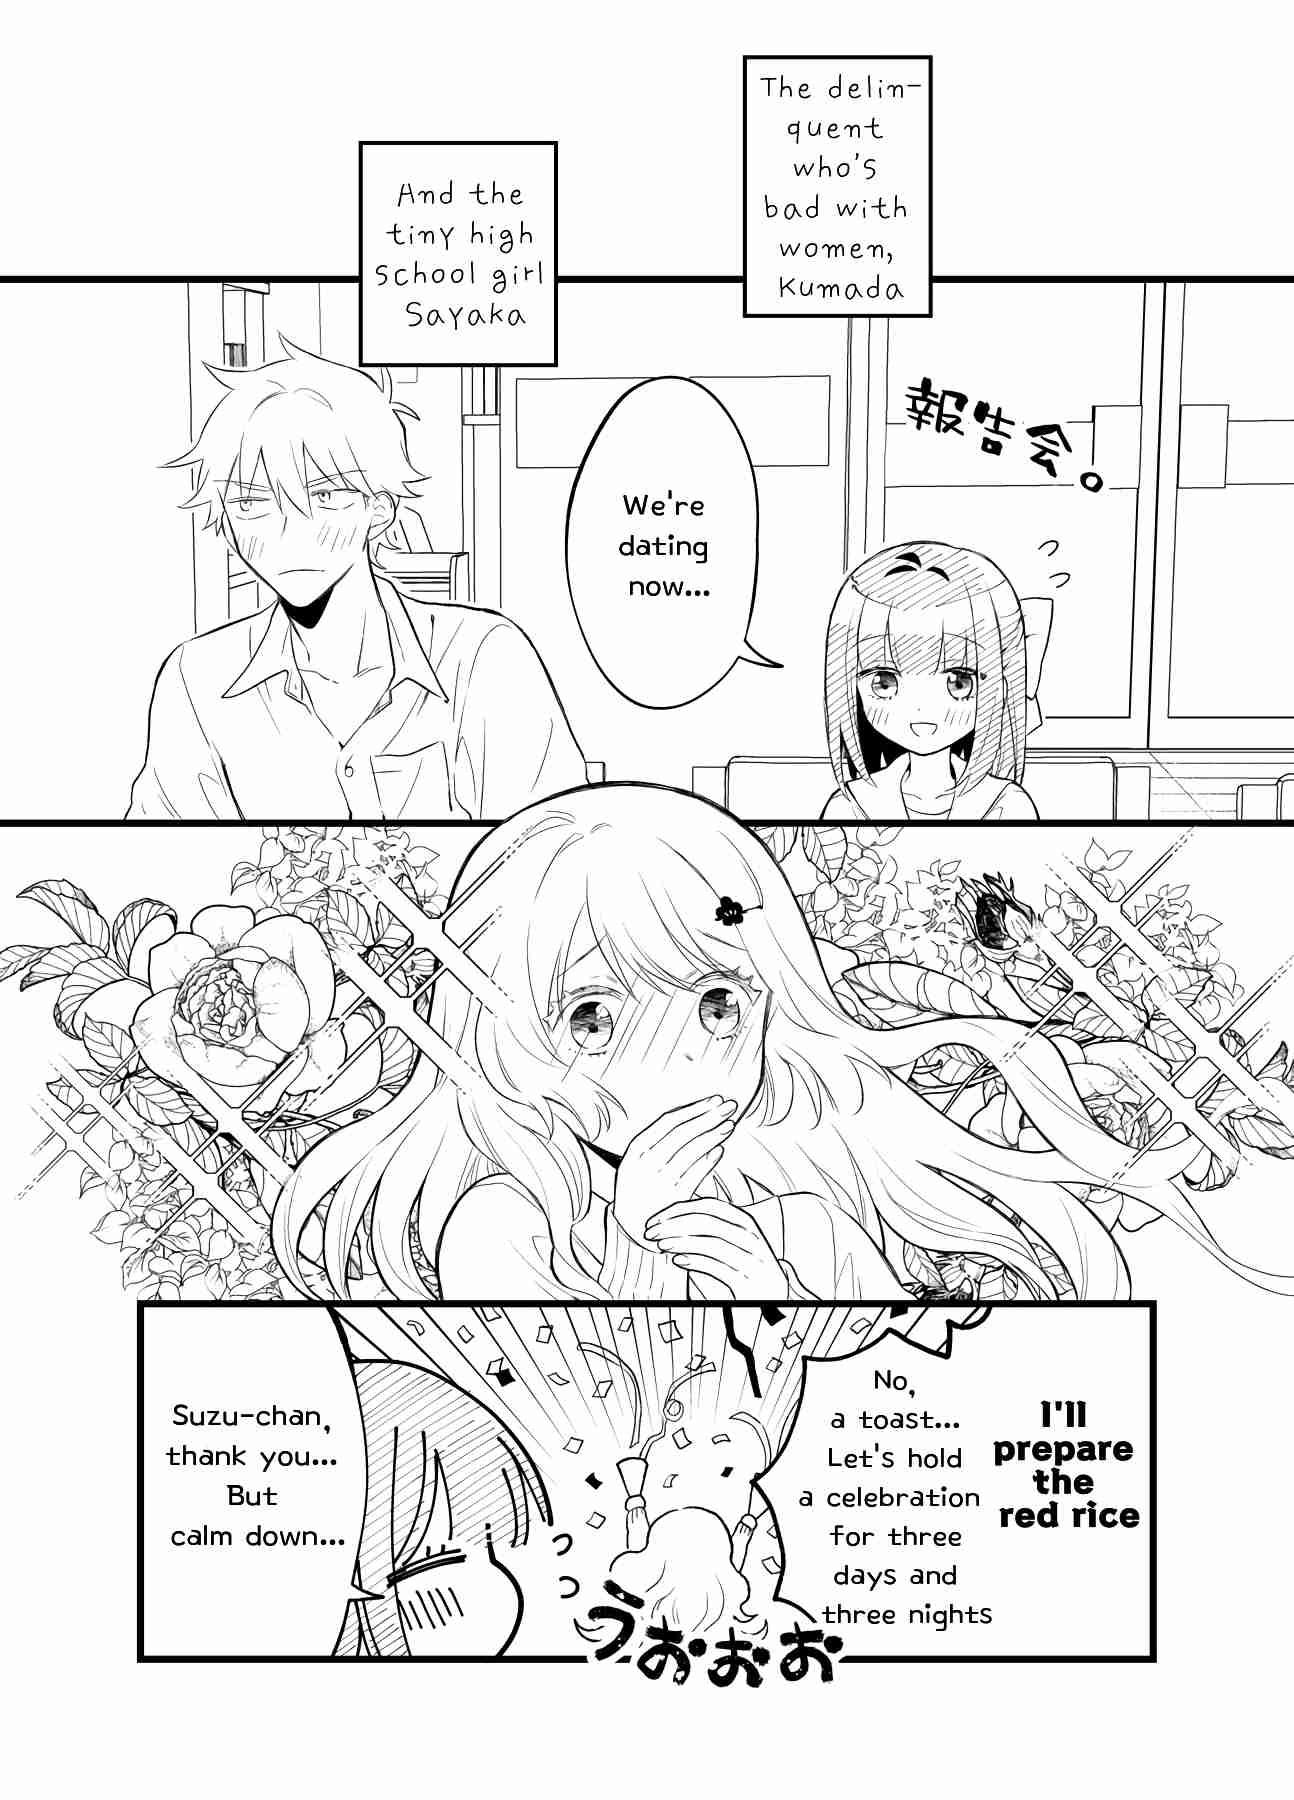 Tale of a Girl and a Delinquent Who's Bad with Women Ch. 21